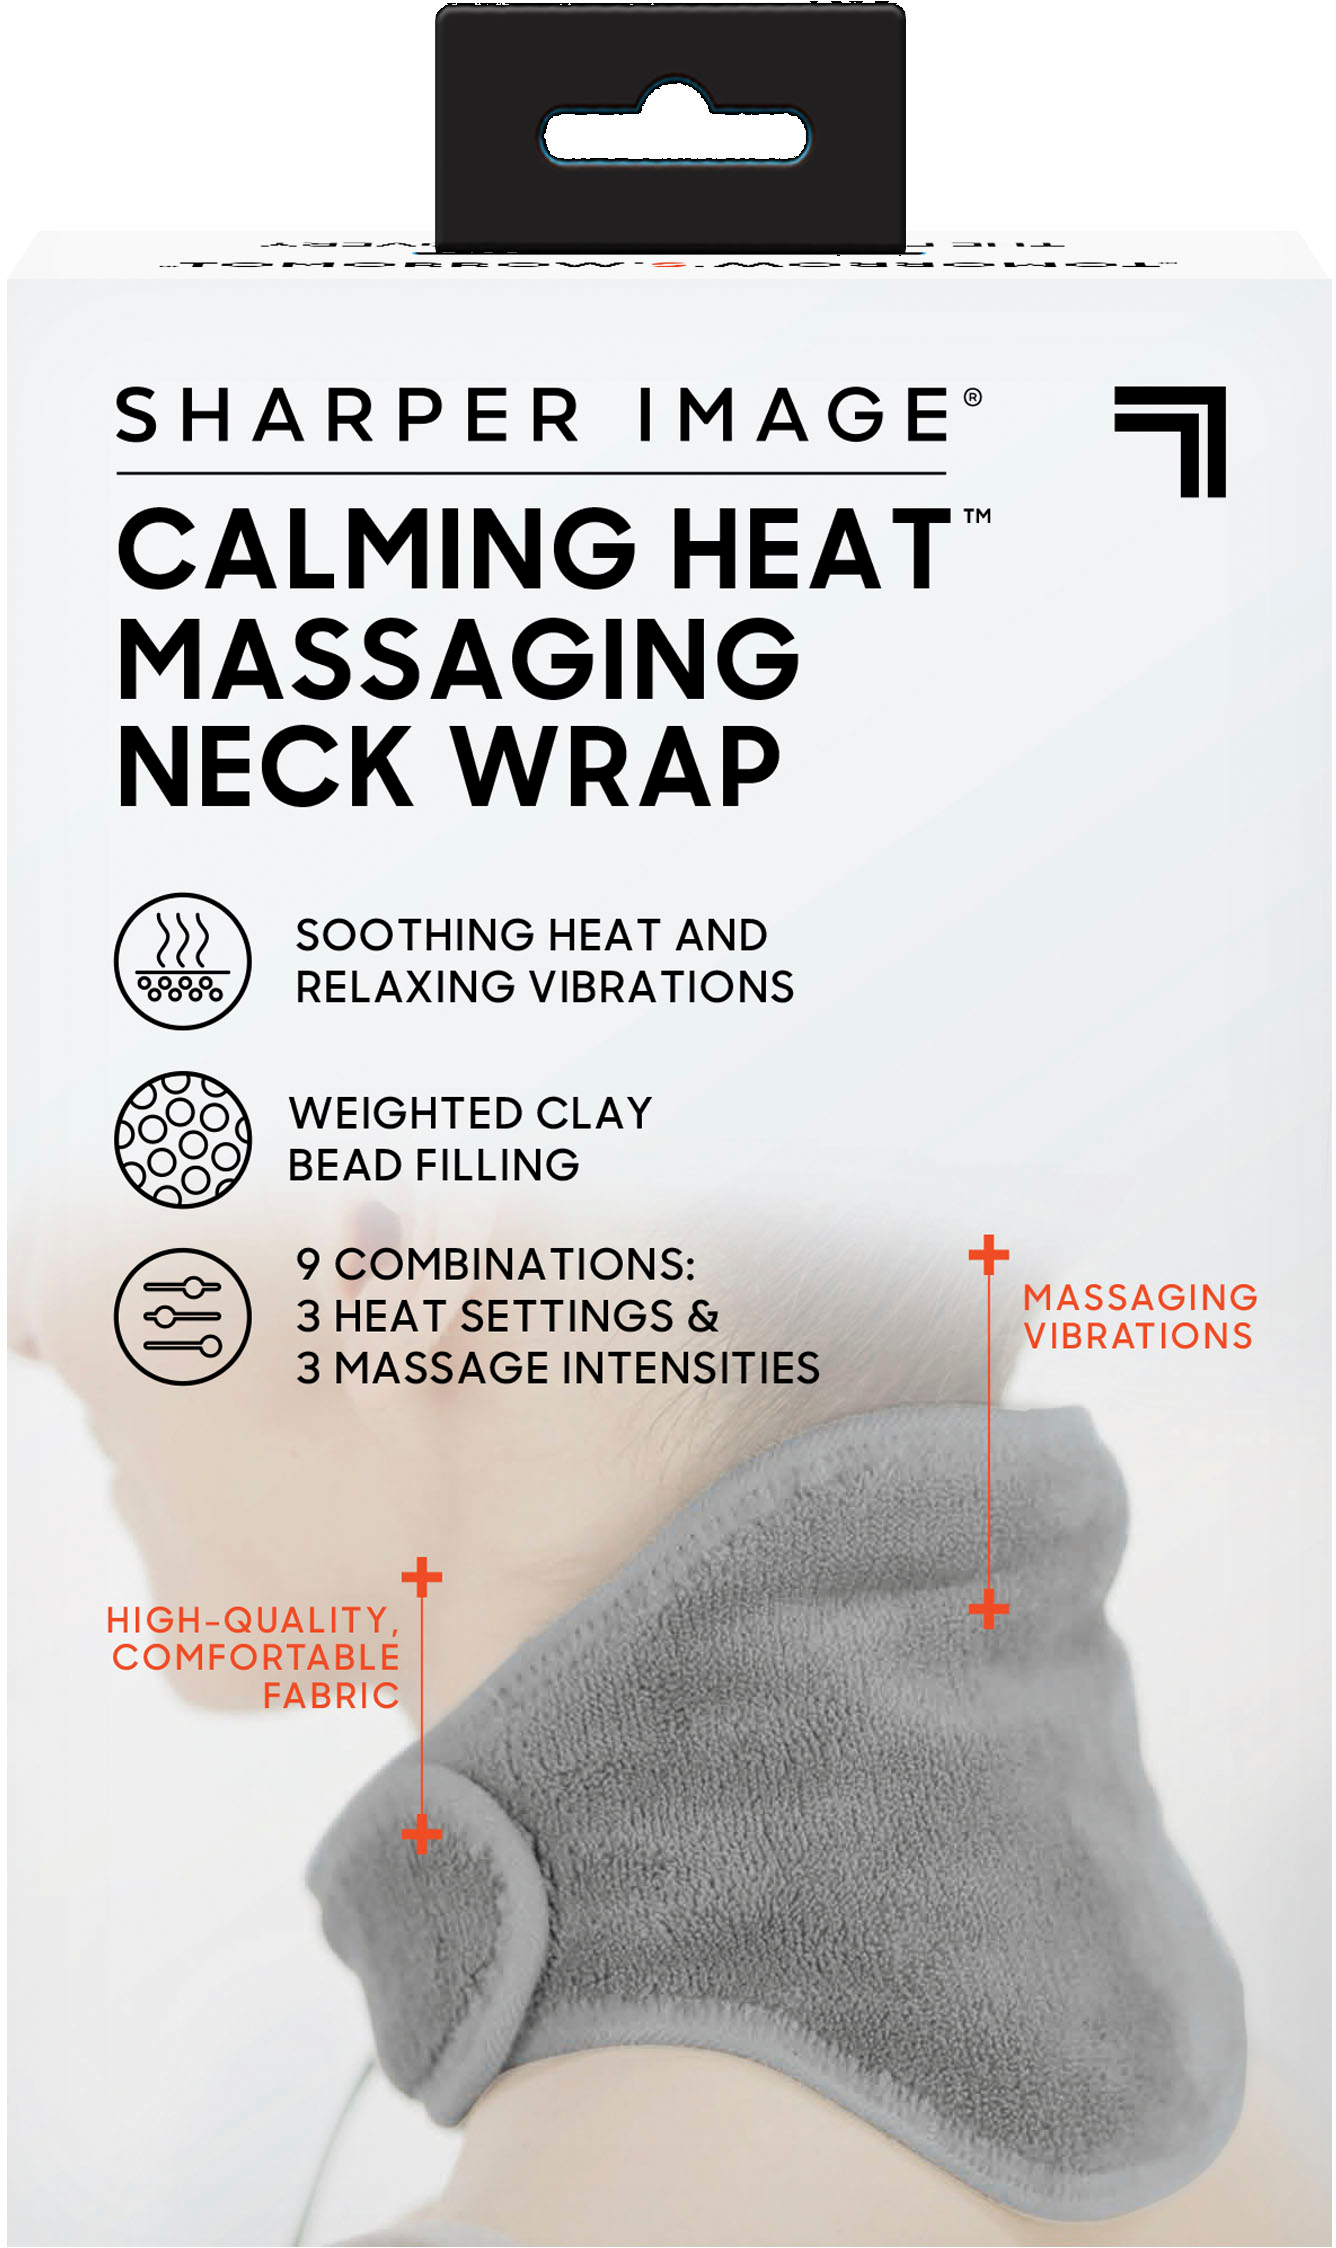 Reviews for Sharper Image Heated Pain Relief Wrap Neck